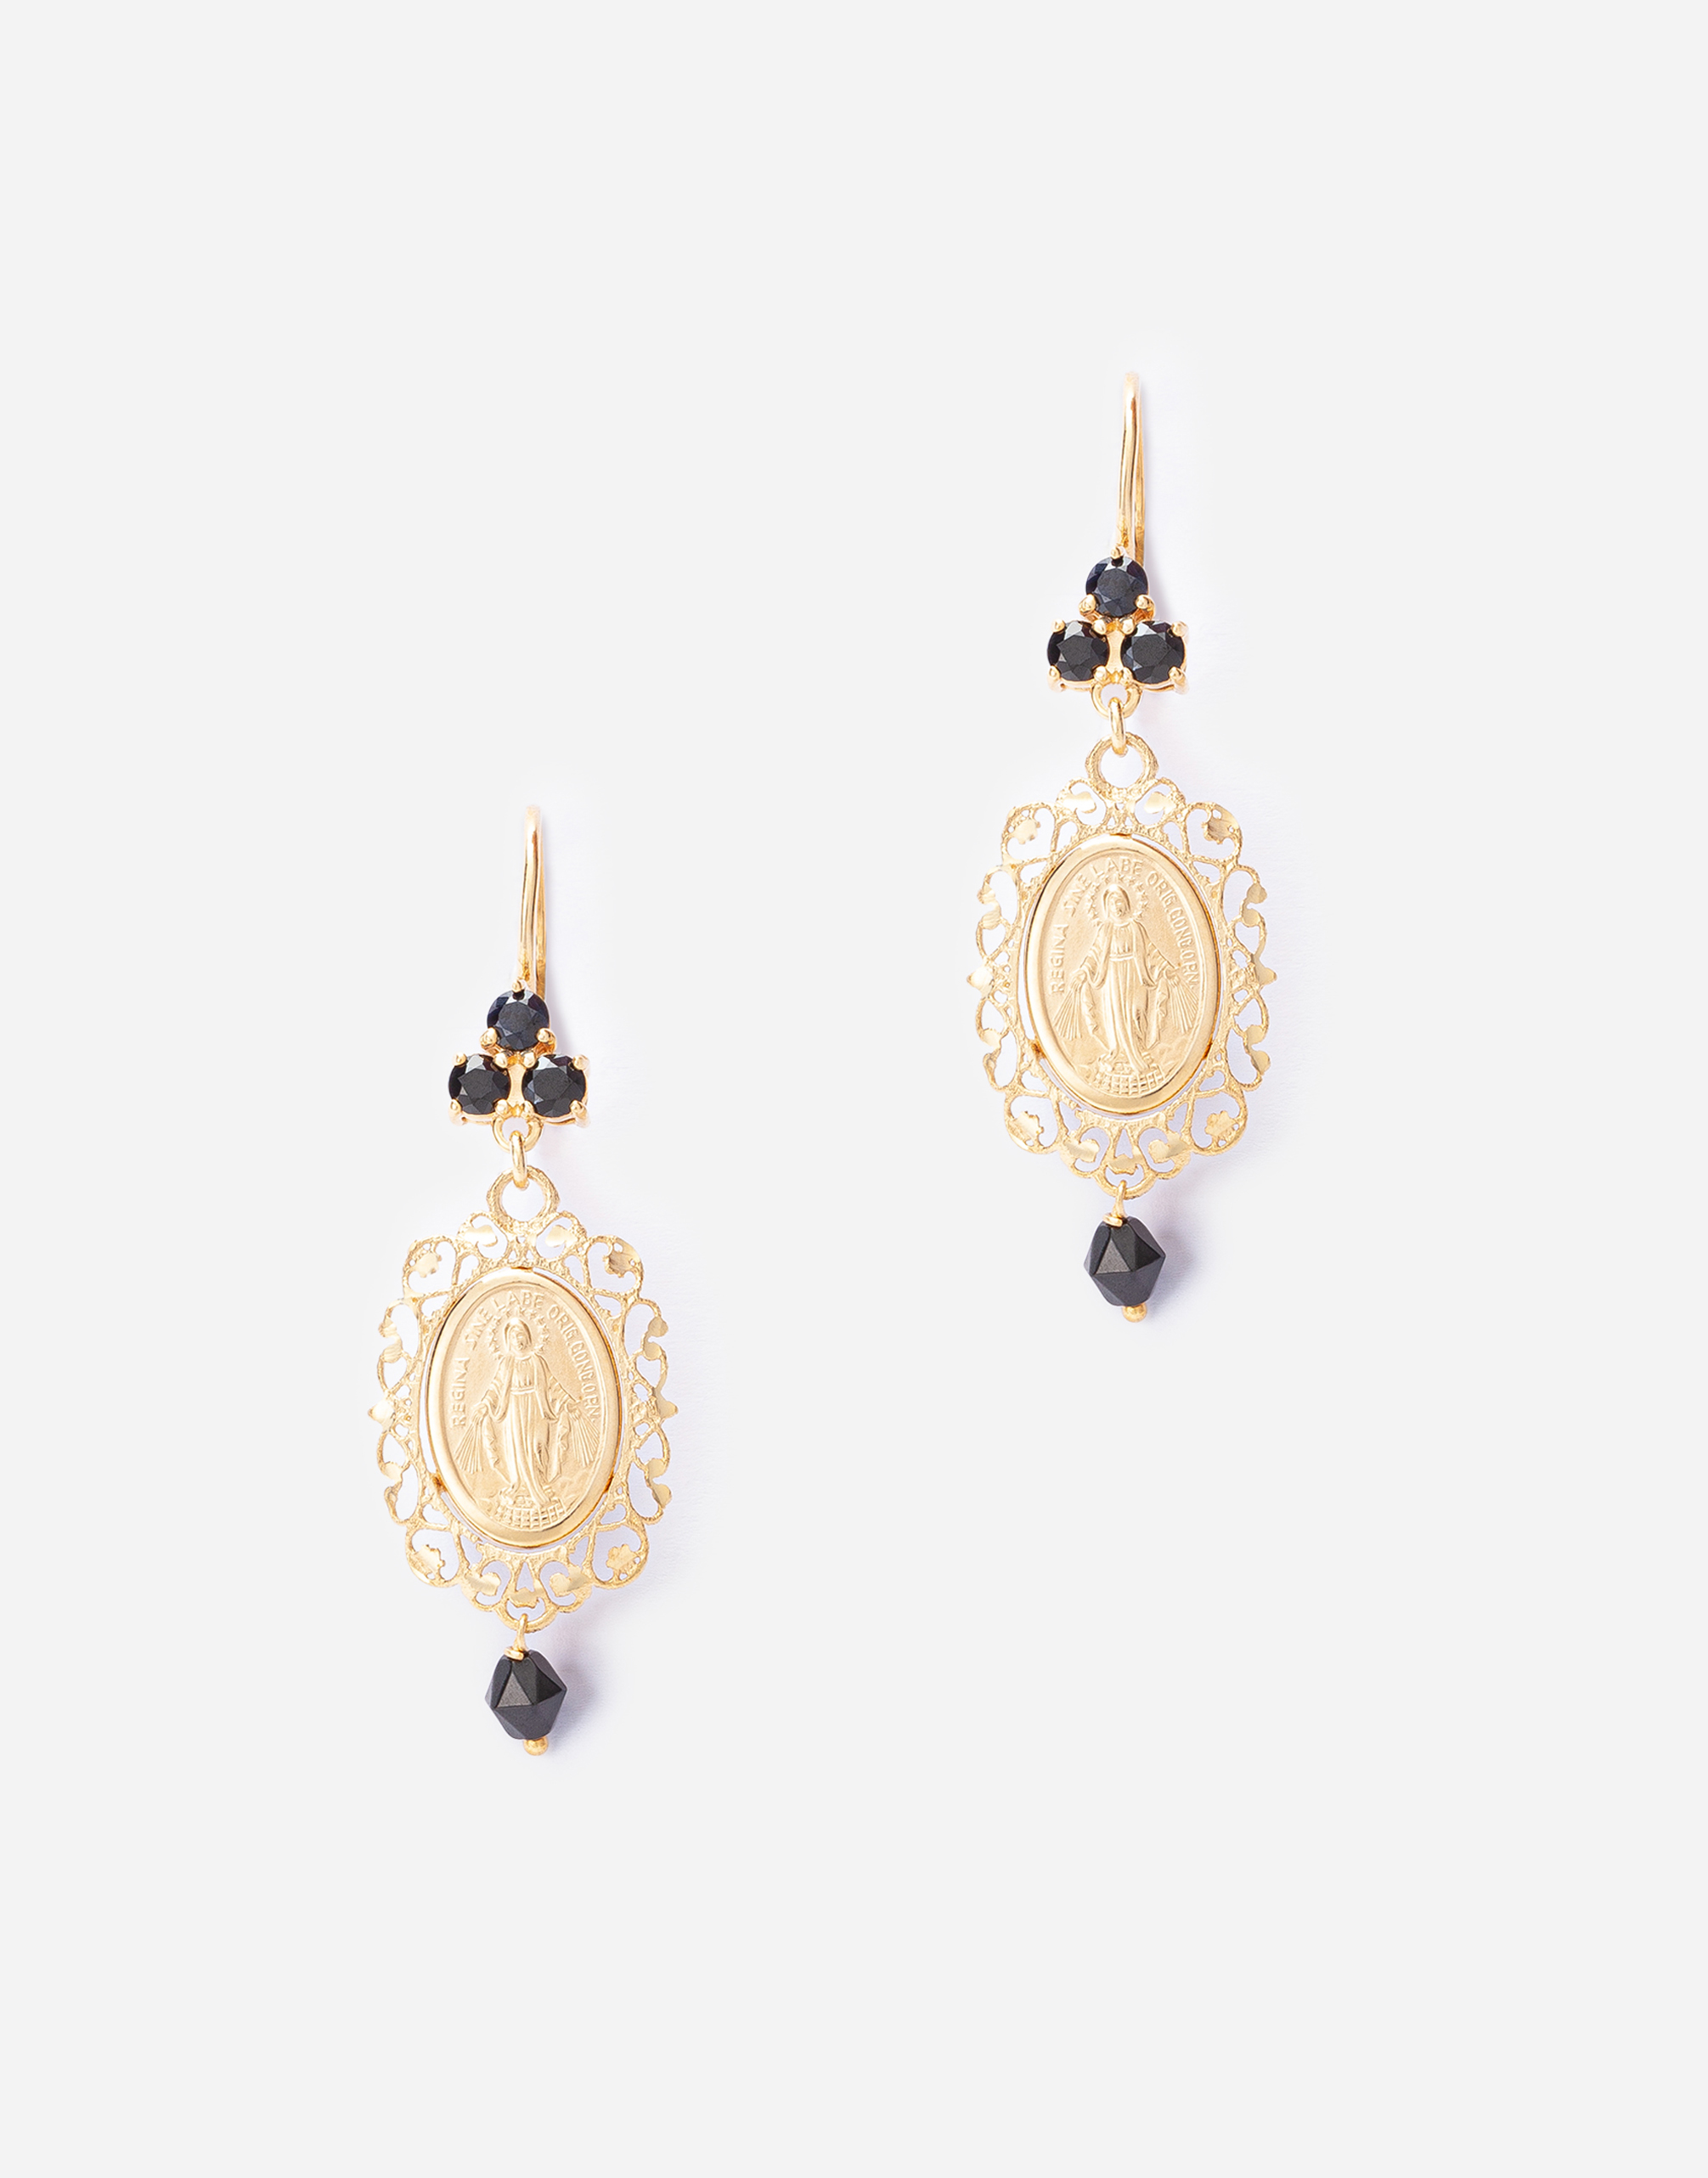 Sicily yellow gold earrings with medal pendant in Gold